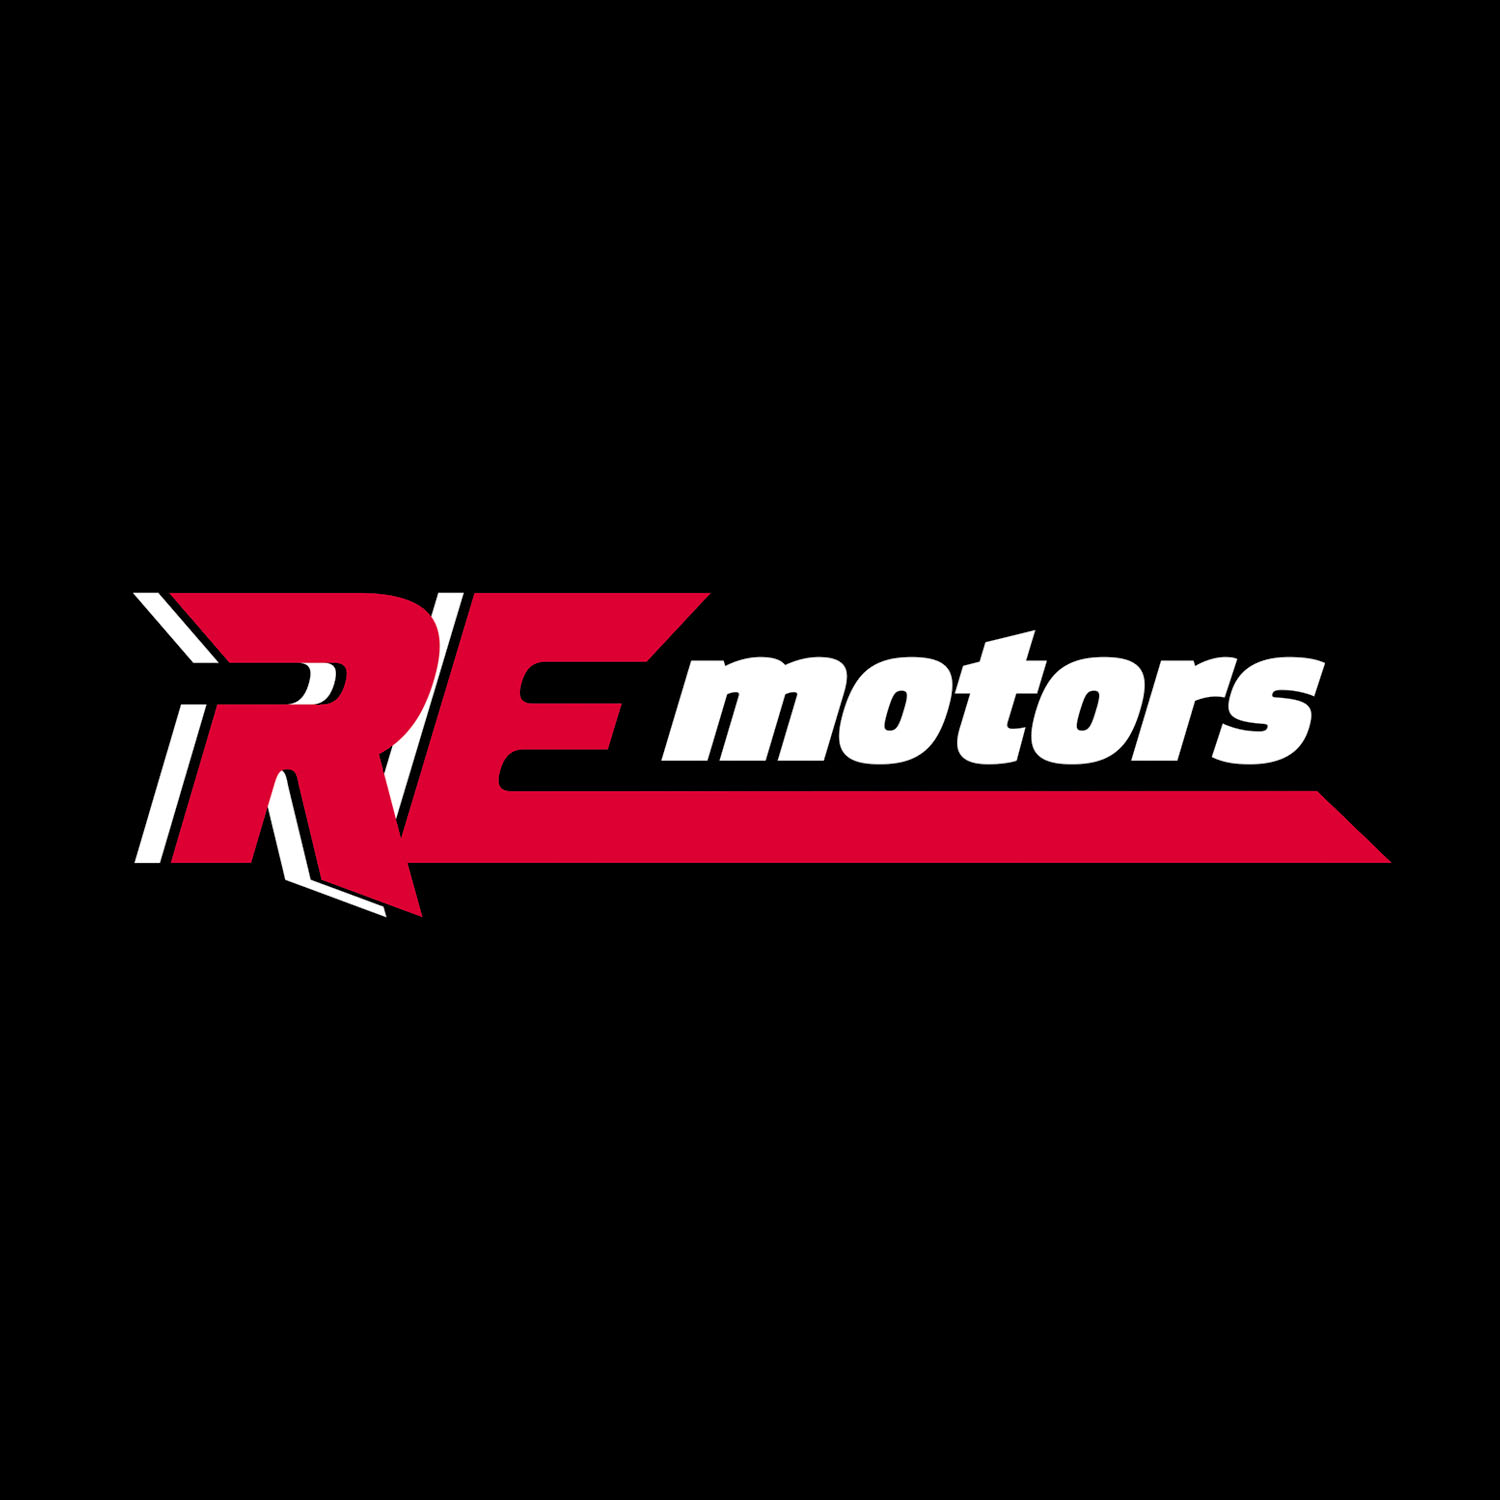 Logo, RE motors, Made by Therwiz Design